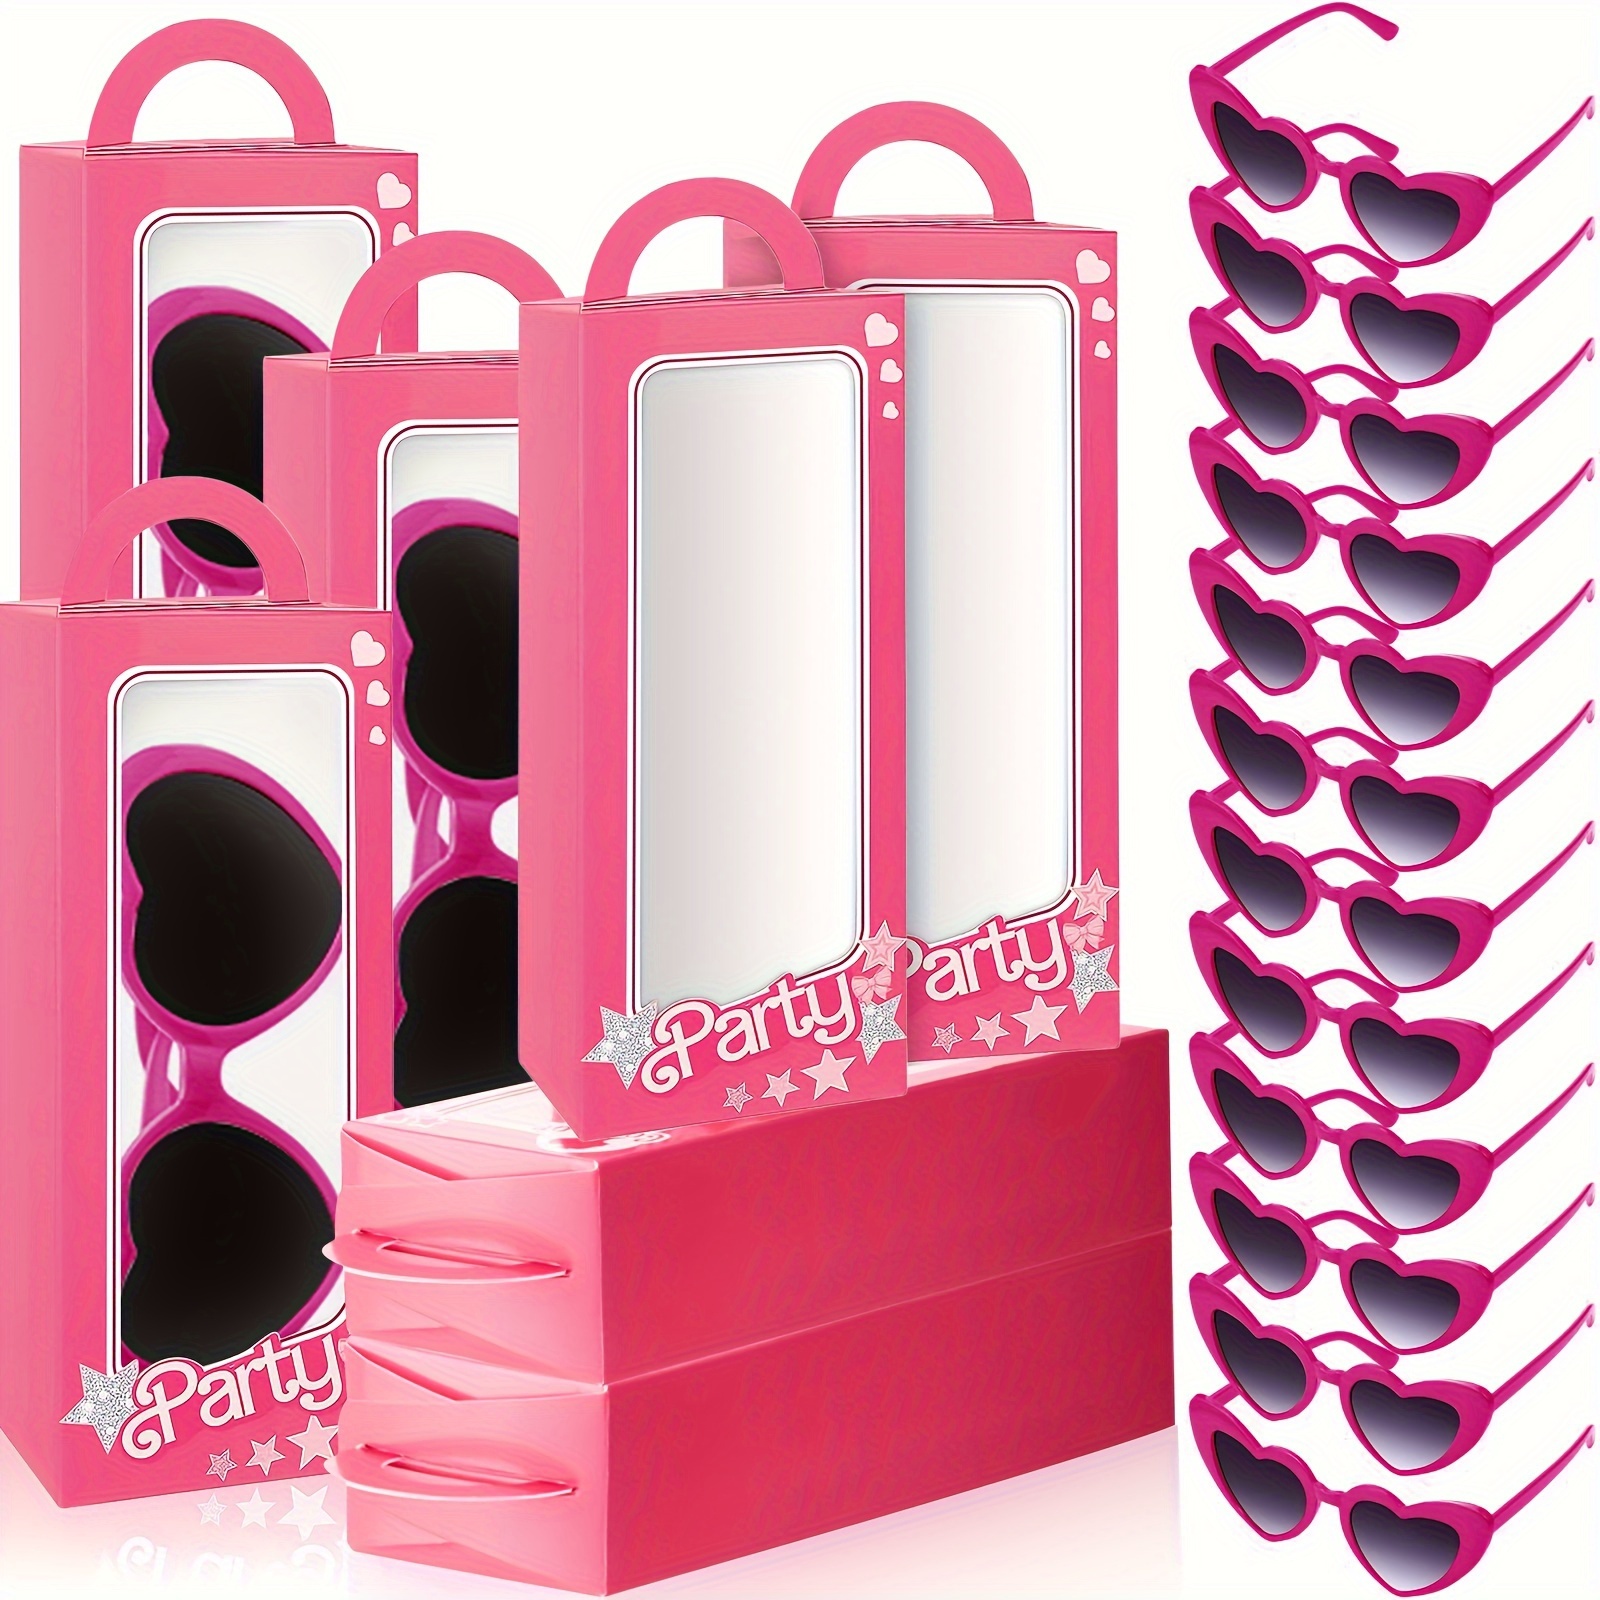 

24pcs, Hot Pink Princess Gift Boxes Set Include 12 Pink Girls Party Favor Boxes 12 Pink Heart Sunglasses Pink Doll Gift Boxes Bachelorette Goodie Bag Candy Boxes For Birthday Party Supplies